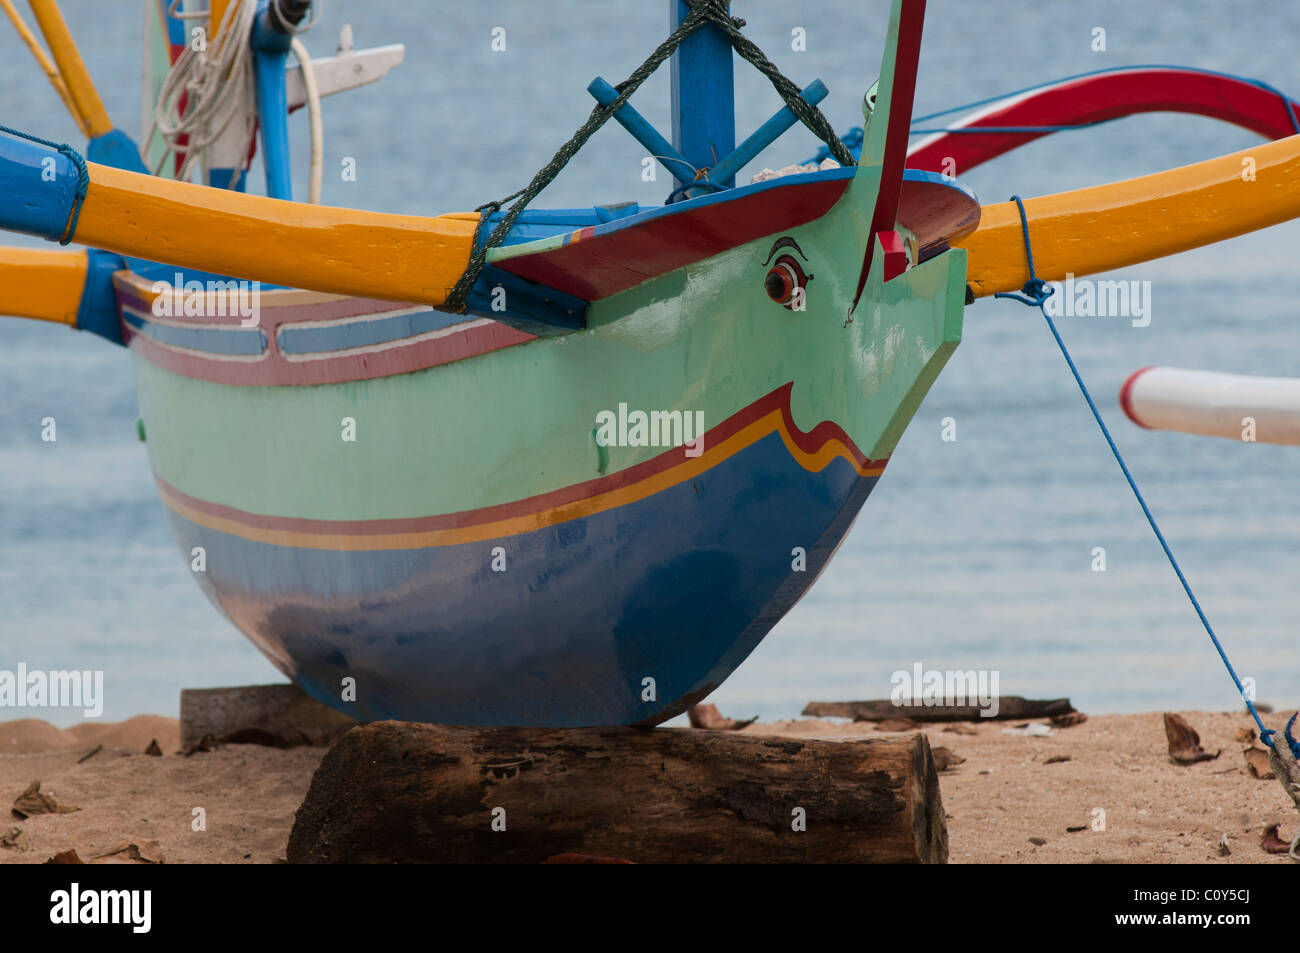 Balinese fishing boat called a jukung on Sanur Beach Bali Indonesia Stock Photo